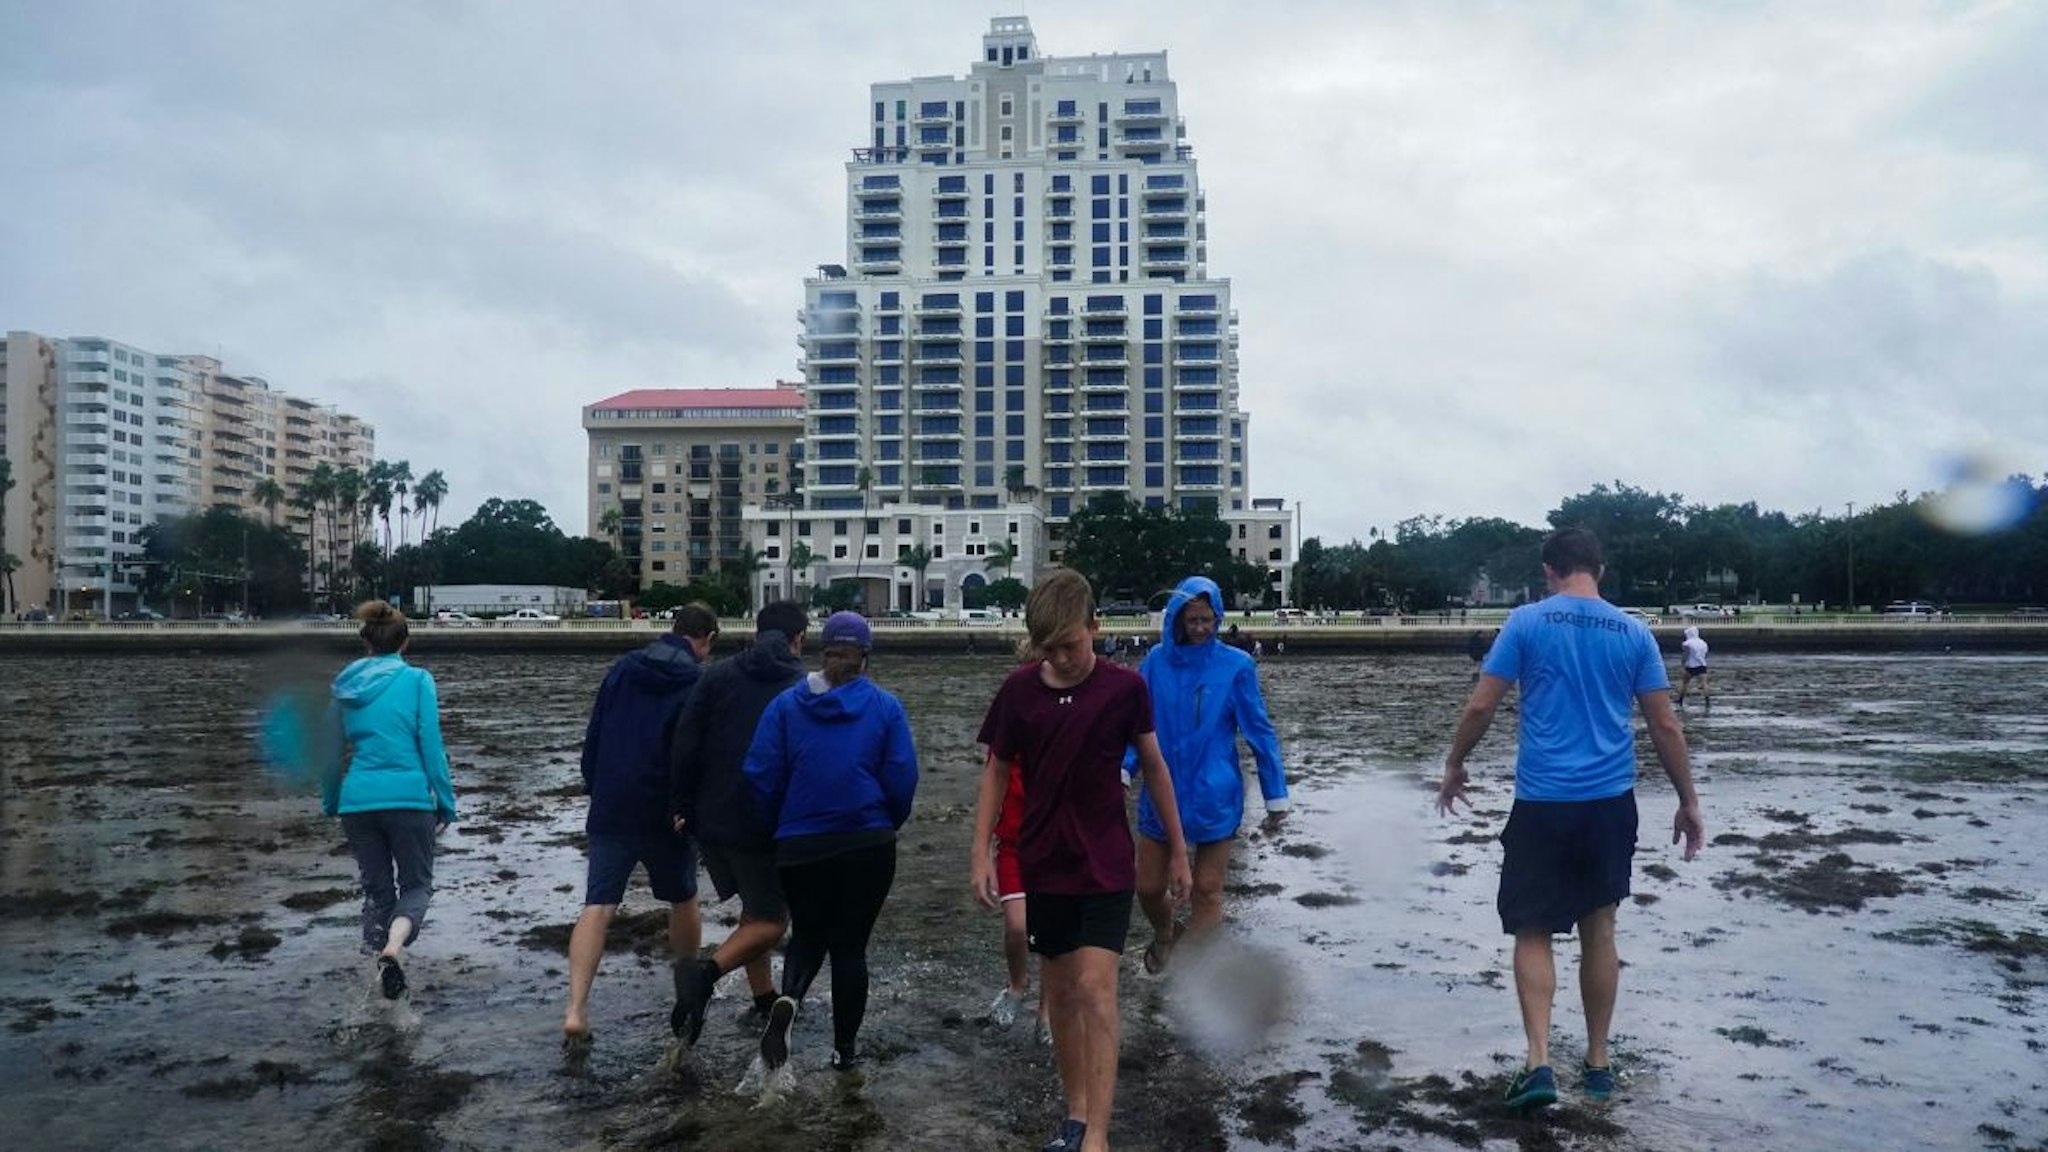 People walk along the mudflats as the tide recedes from Tampa Bay ahead of Hurricane Ian making landfall on September 28, 2022 in Tampa, Florida.